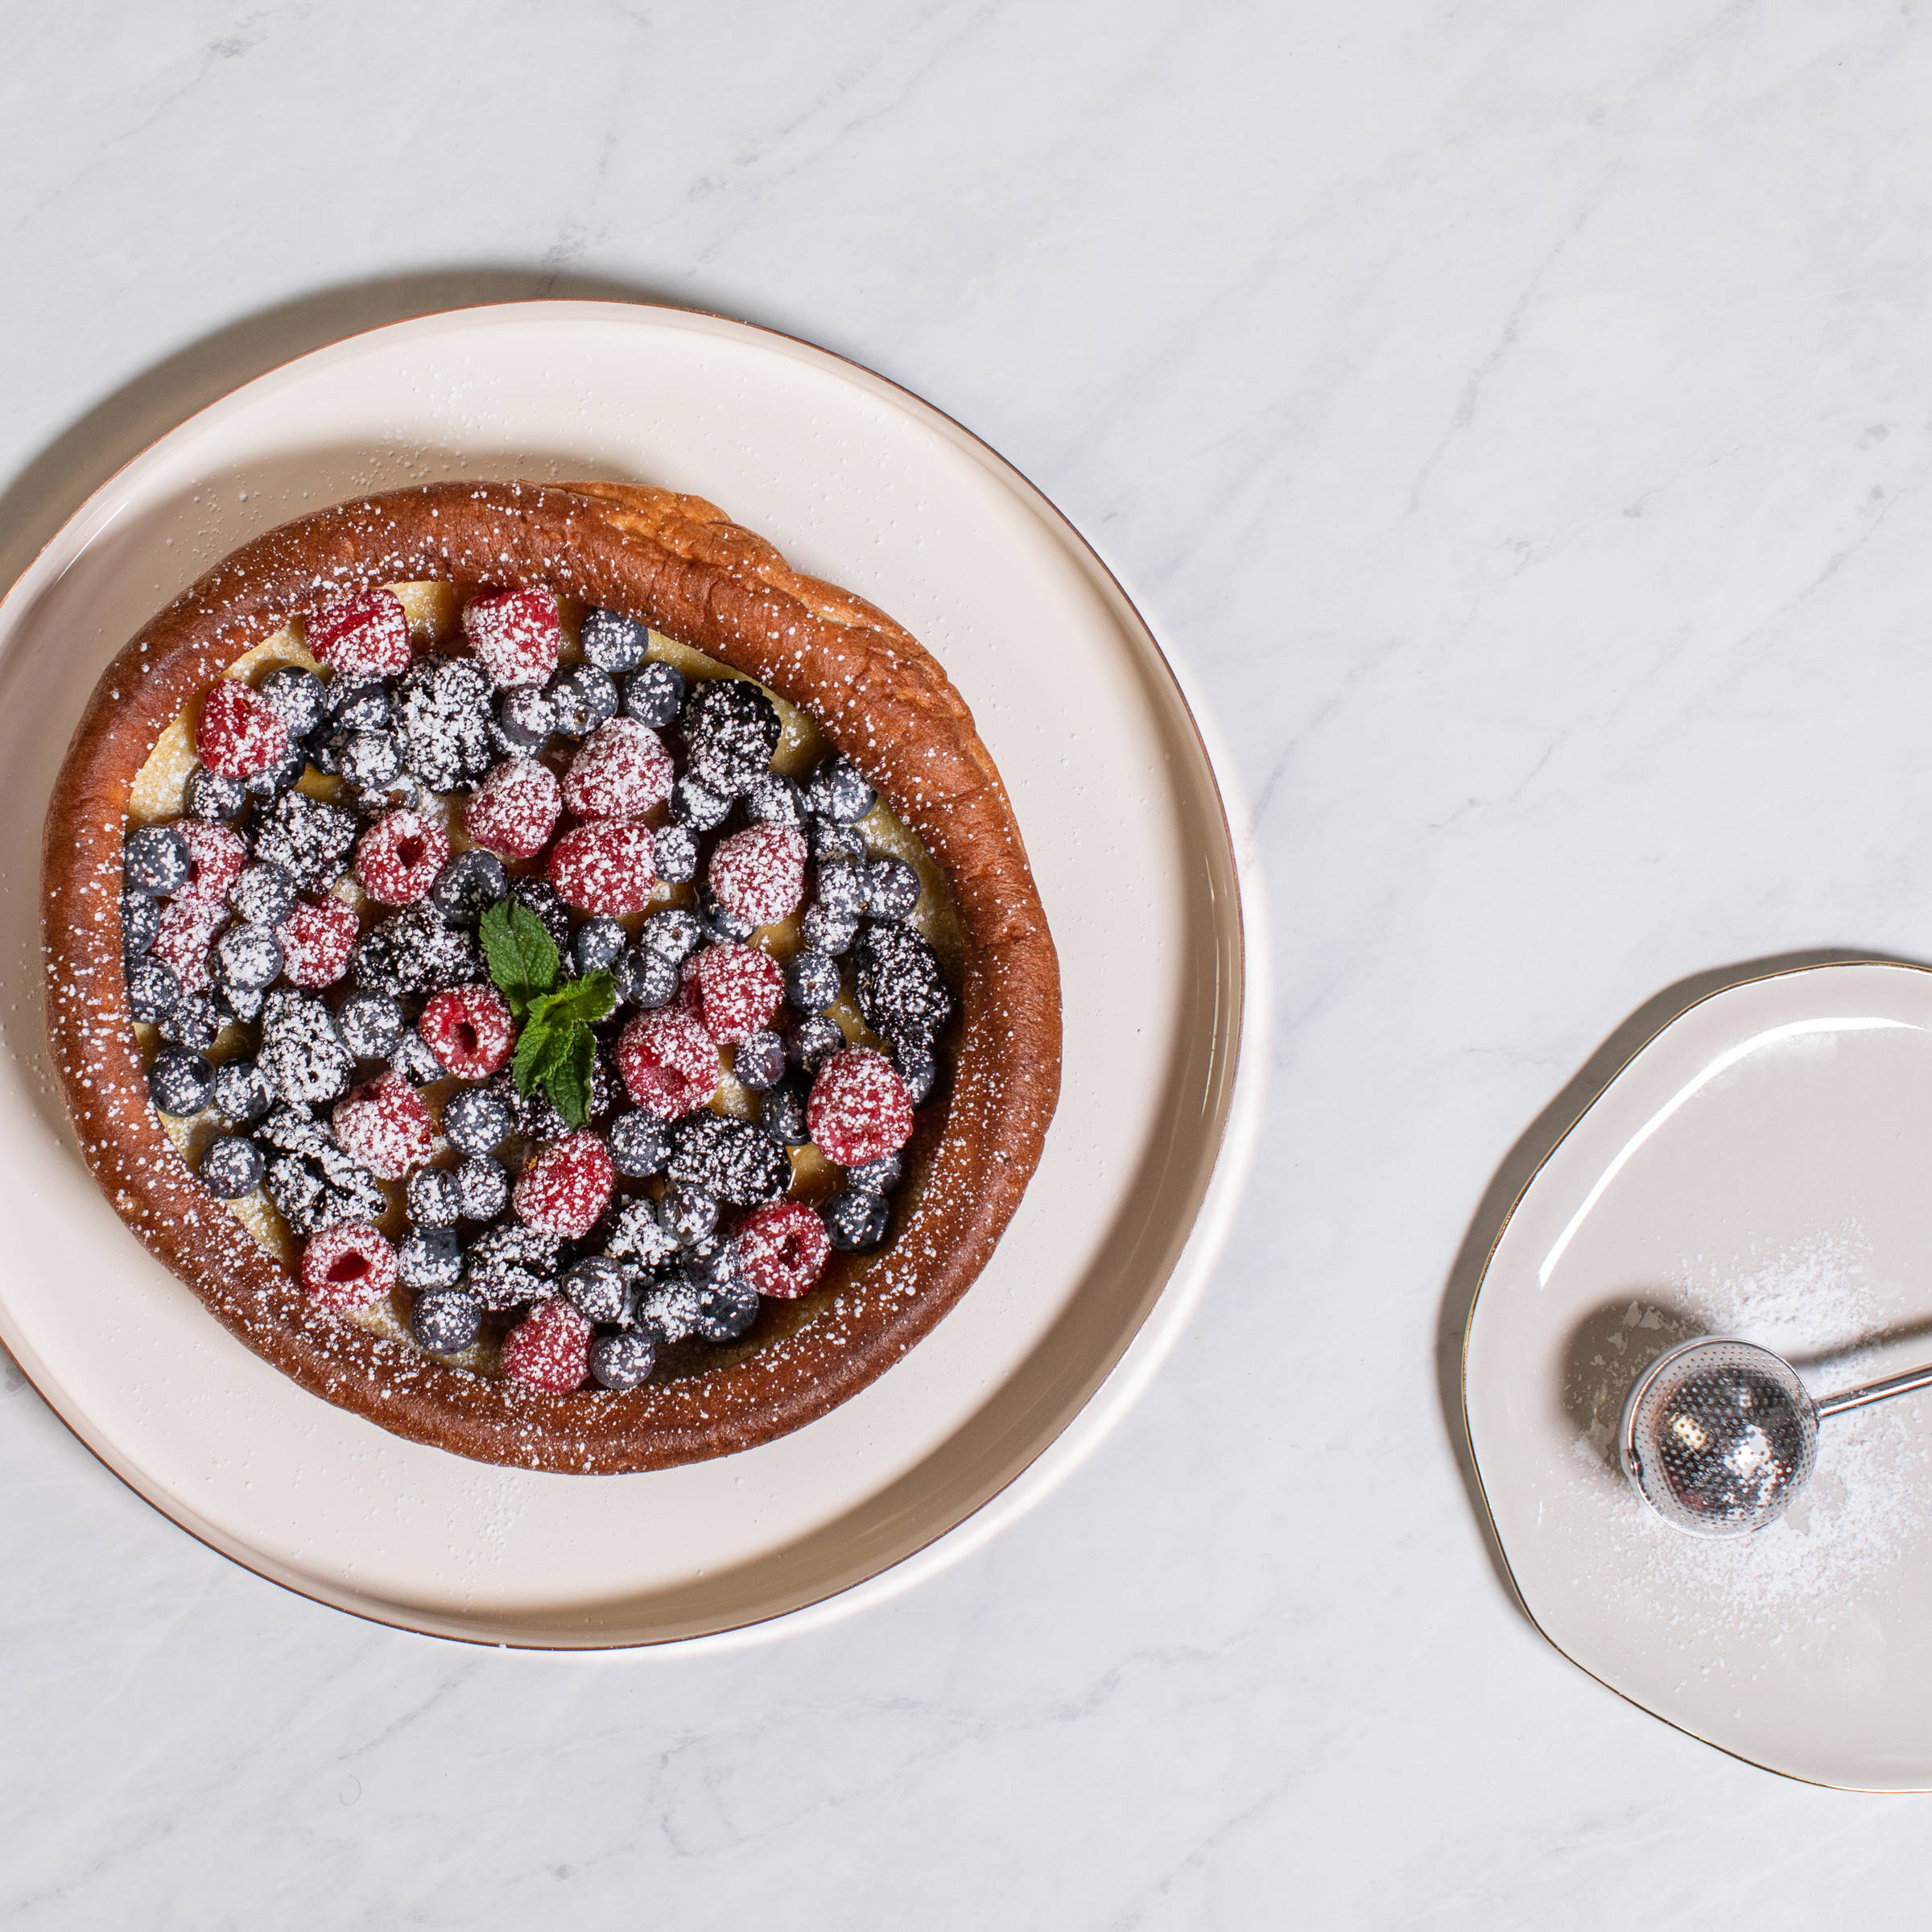 Sweet Dutch Baby with berries